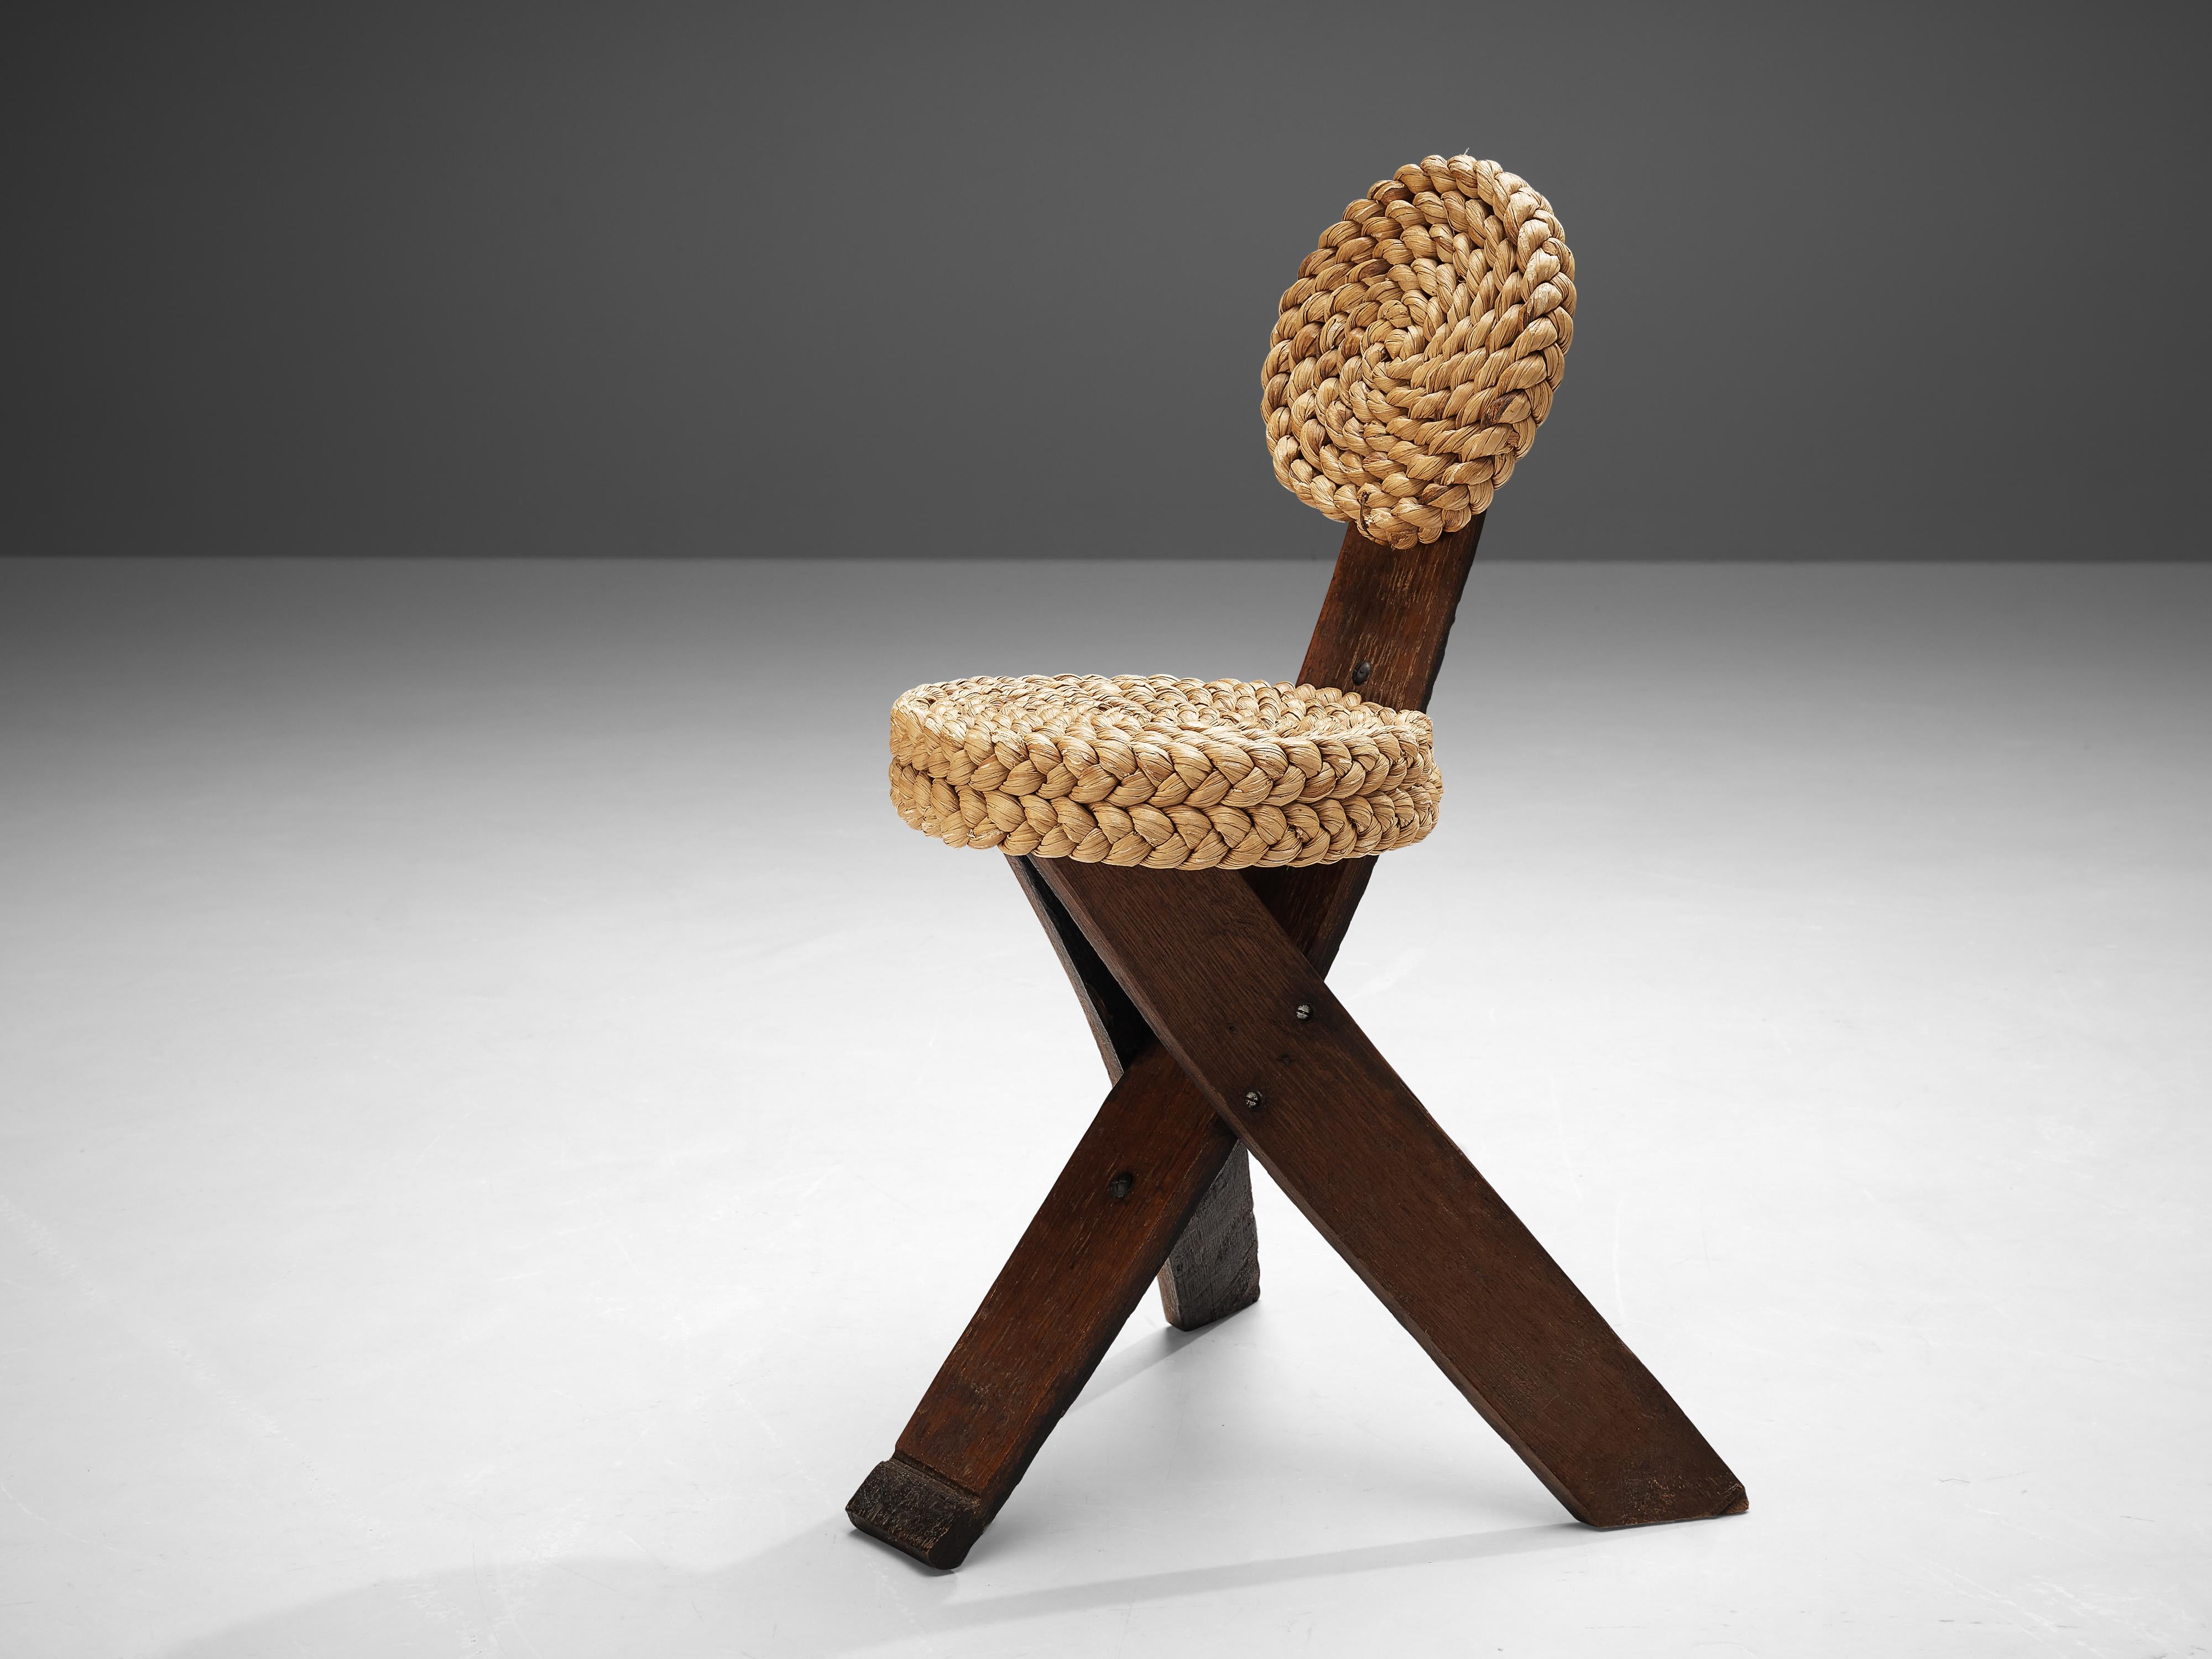 Adrien Audoux and Frida Minet, side chair, oak, straw, France, 1950s

Ths sculptural side chair was created by the French designer couple Adrien Audoux and Frida Minet. The three flat legs are made of dark oak. One leg runs upwards and ends with